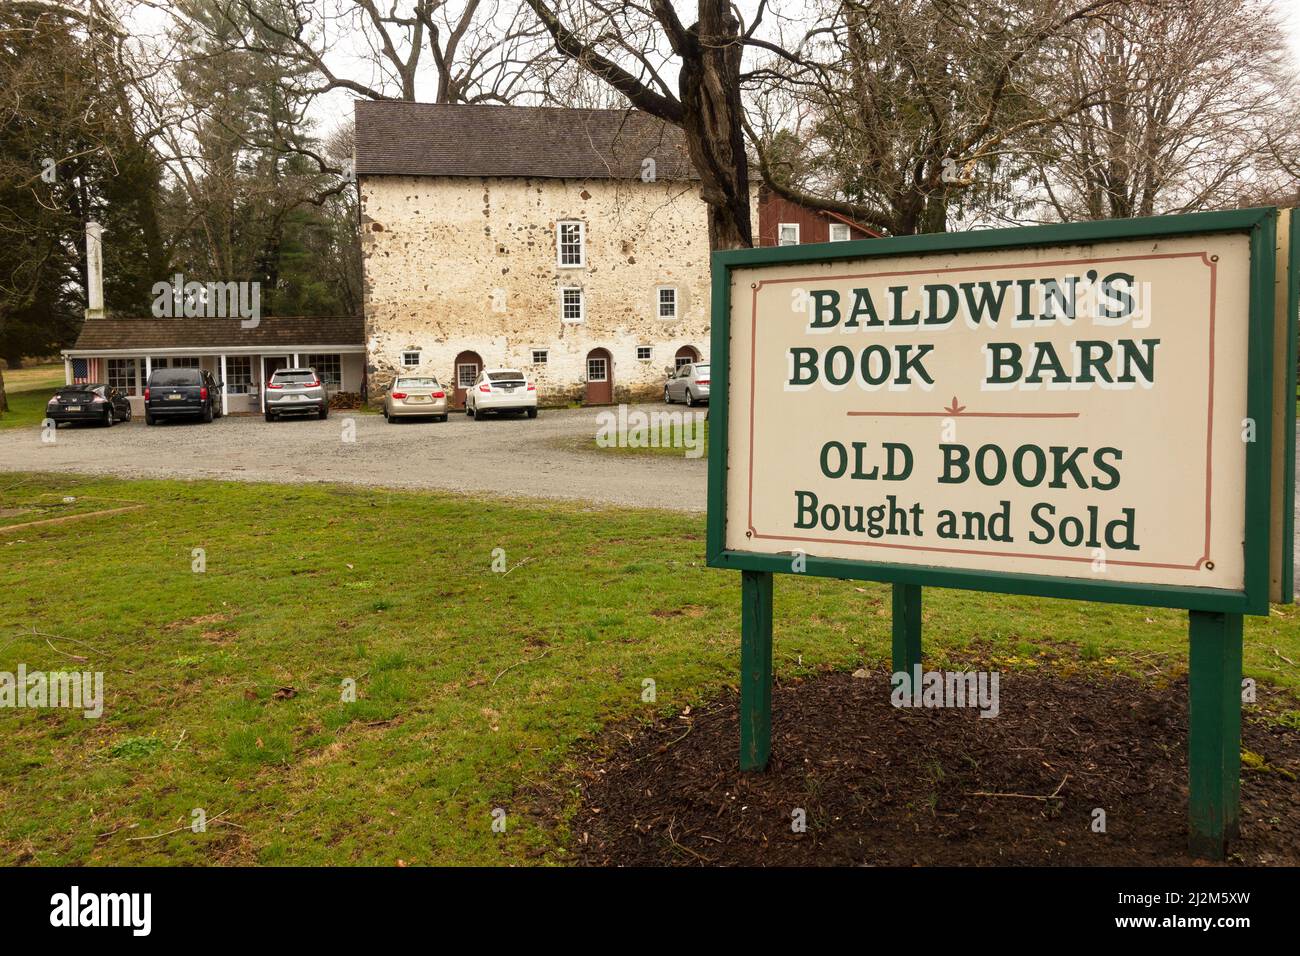 Baldwin's Book Barn old books bought and sold in West Chester PA Stock Photo